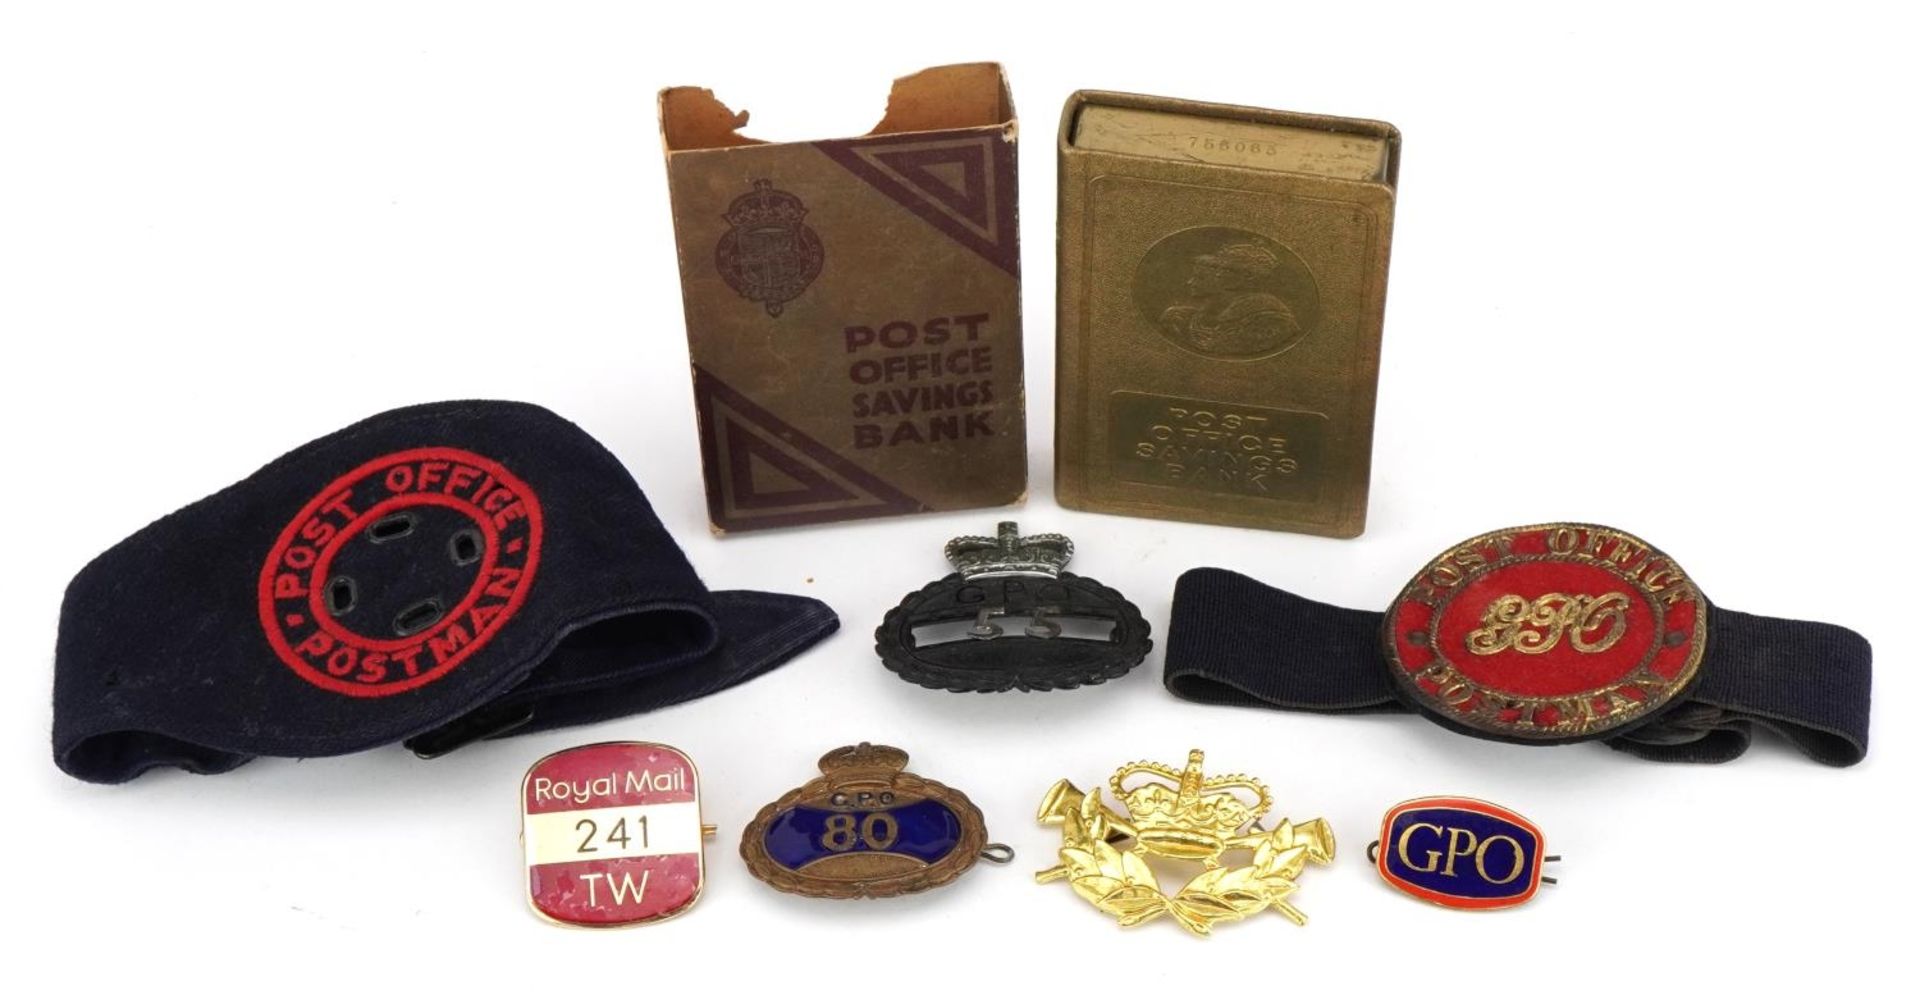 Post Office collectables including early postman armband, badges and Savings Bank